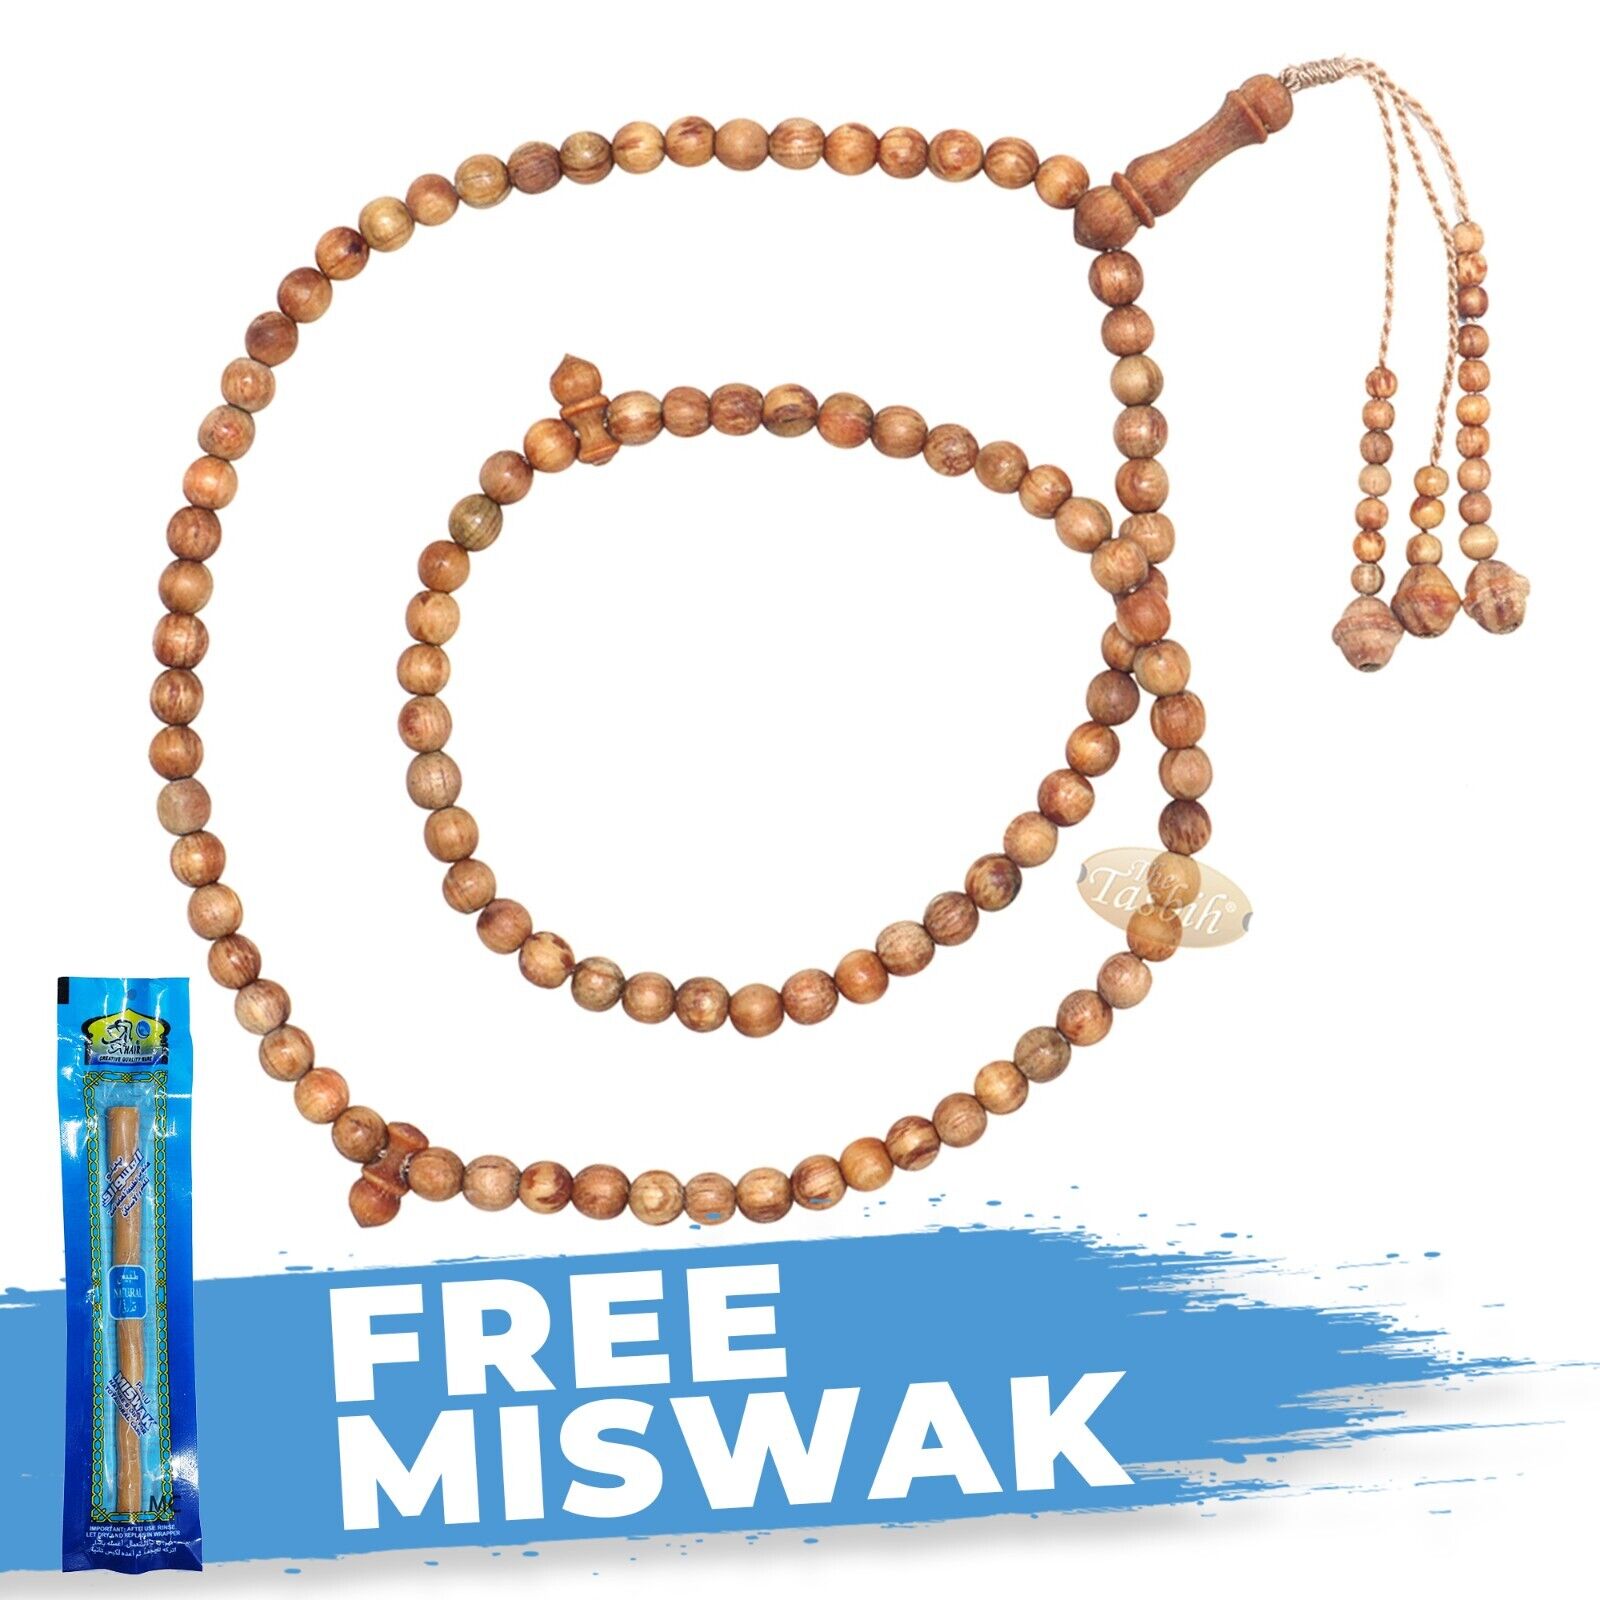 Natural Scent Muslim Dhikr  99ct Pine Pitch Wood Prayer Beads - 8mm Islamic